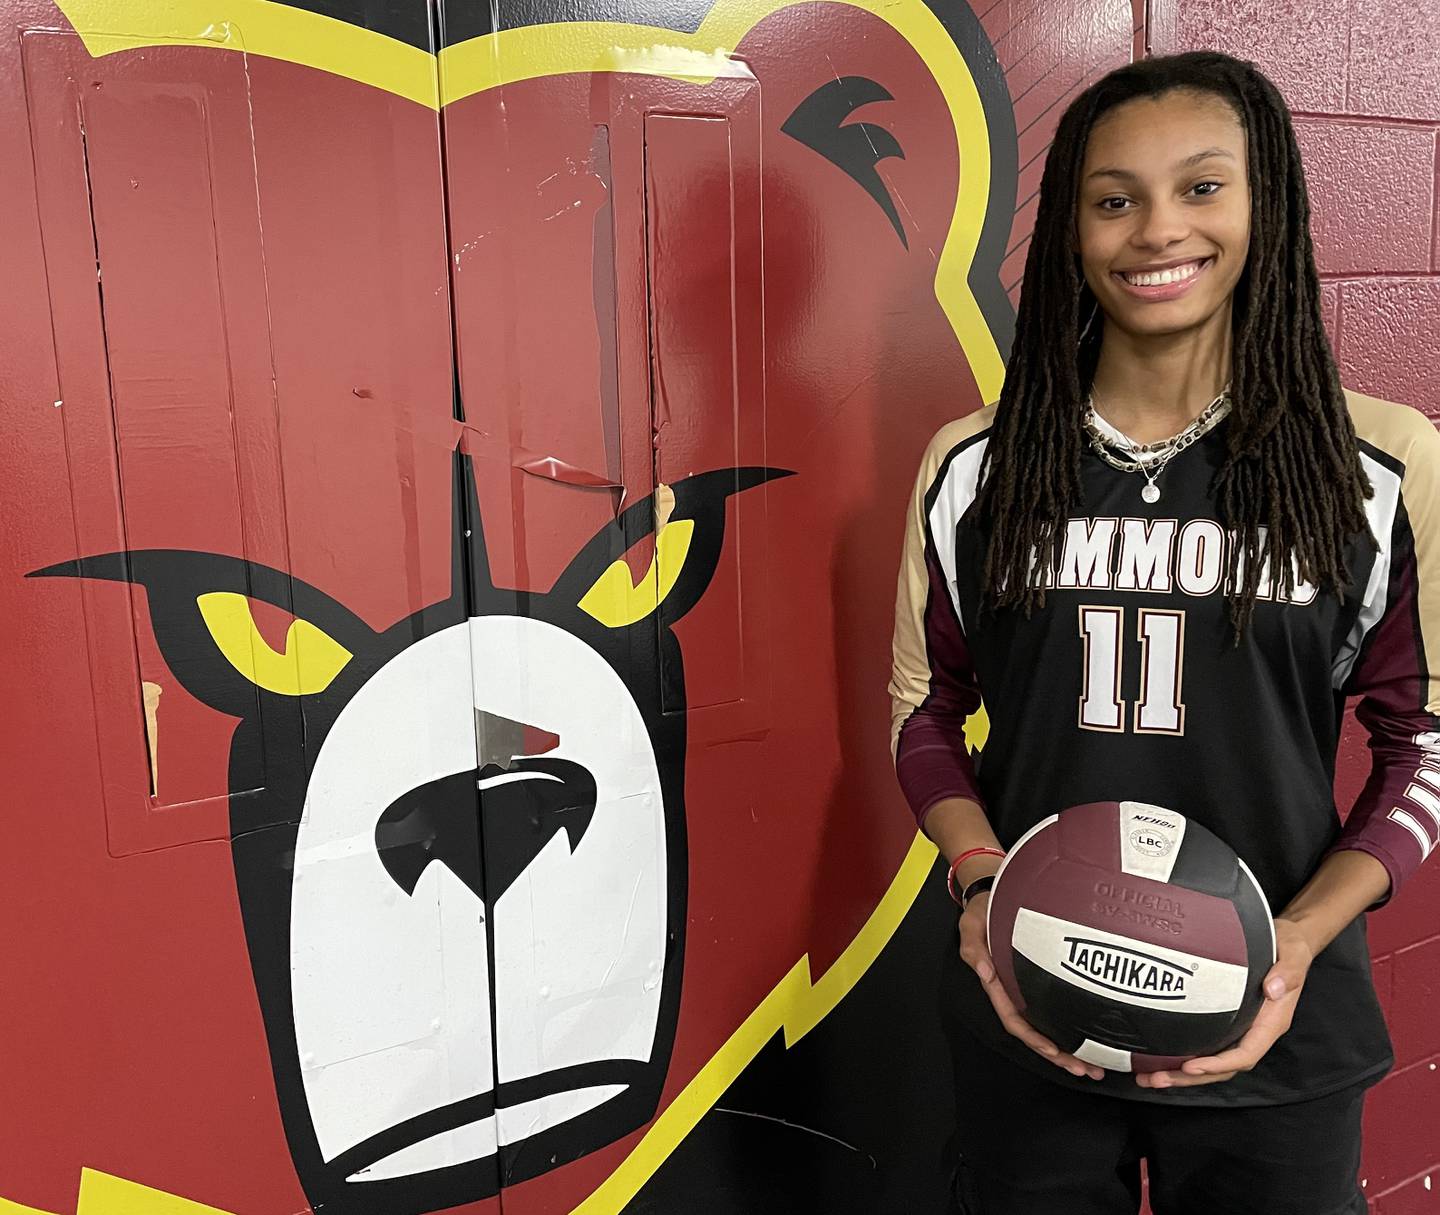 Hammond outside hitter Safi Hampton has emerged as one of the top high school volleyball players in the Baltimore area and has twice been an All-Howard County first team selection. She has committed to play for North Carolina and hopes to play professionally in Europe after her college career ends.